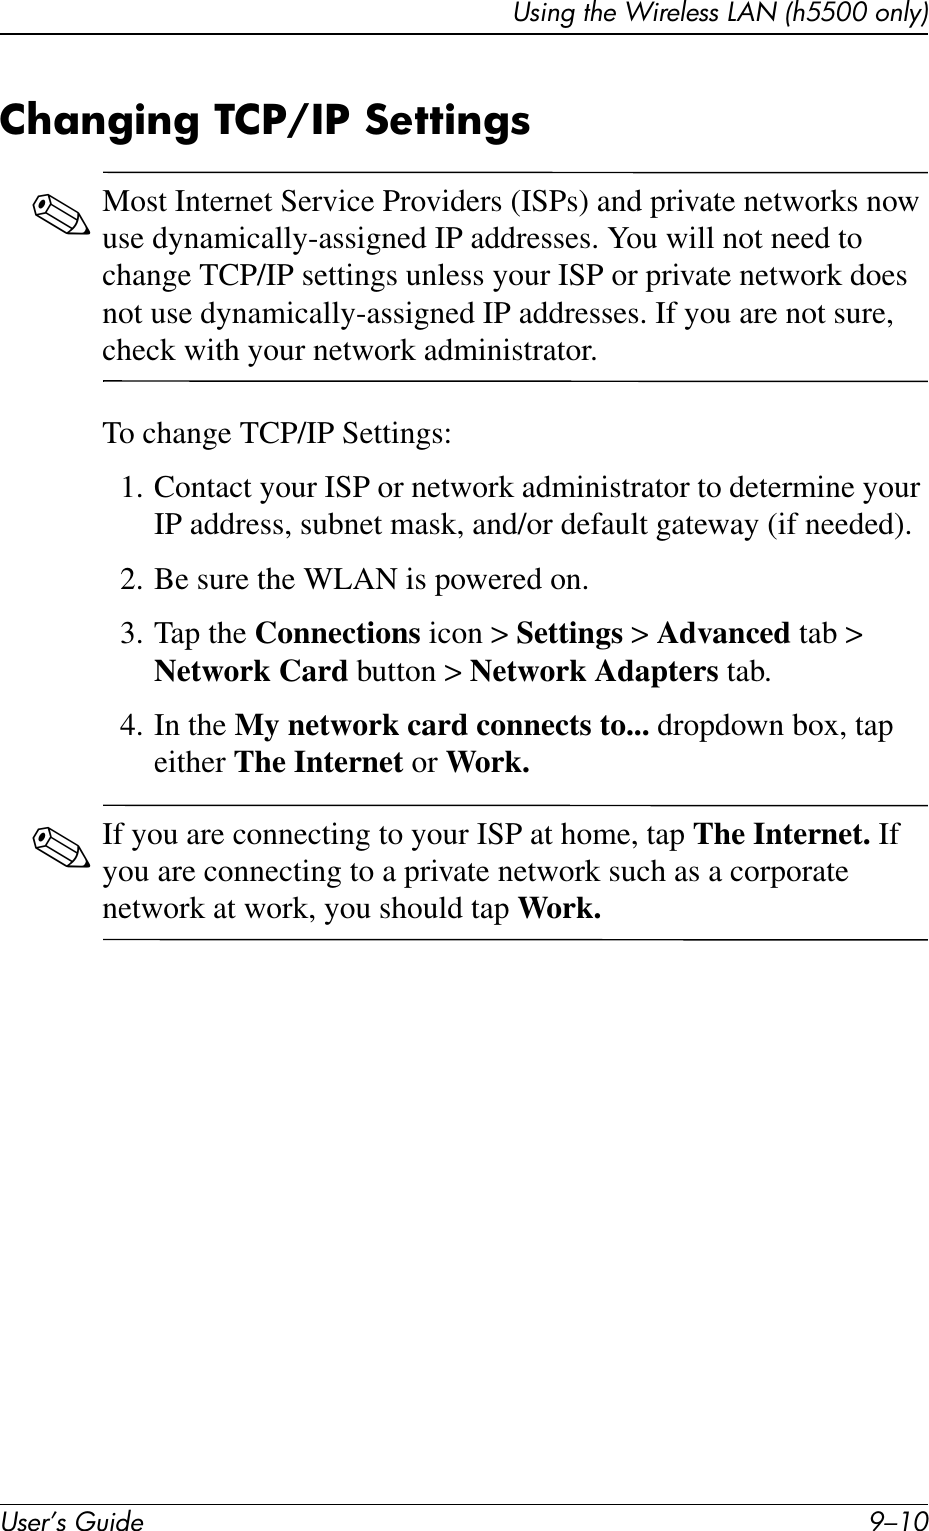 User’s Guide 9–10Using the Wireless LAN (h5500 only)Changing TCP/IP Settings✎Most Internet Service Providers (ISPs) and private networks now use dynamically-assigned IP addresses. You will not need to change TCP/IP settings unless your ISP or private network does not use dynamically-assigned IP addresses. If you are not sure, check with your network administrator.To change TCP/IP Settings:1. Contact your ISP or network administrator to determine your IP address, subnet mask, and/or default gateway (if needed).2. Be sure the WLAN is powered on.3. Tap the Connections icon &gt; Settings &gt; Advanced tab &gt; Network Card button &gt; Network Adapters tab.4. In the My network card connects to... dropdown box, tap either The Internet or Work.✎If you are connecting to your ISP at home, tap The Internet. If you are connecting to a private network such as a corporate network at work, you should tap Work.